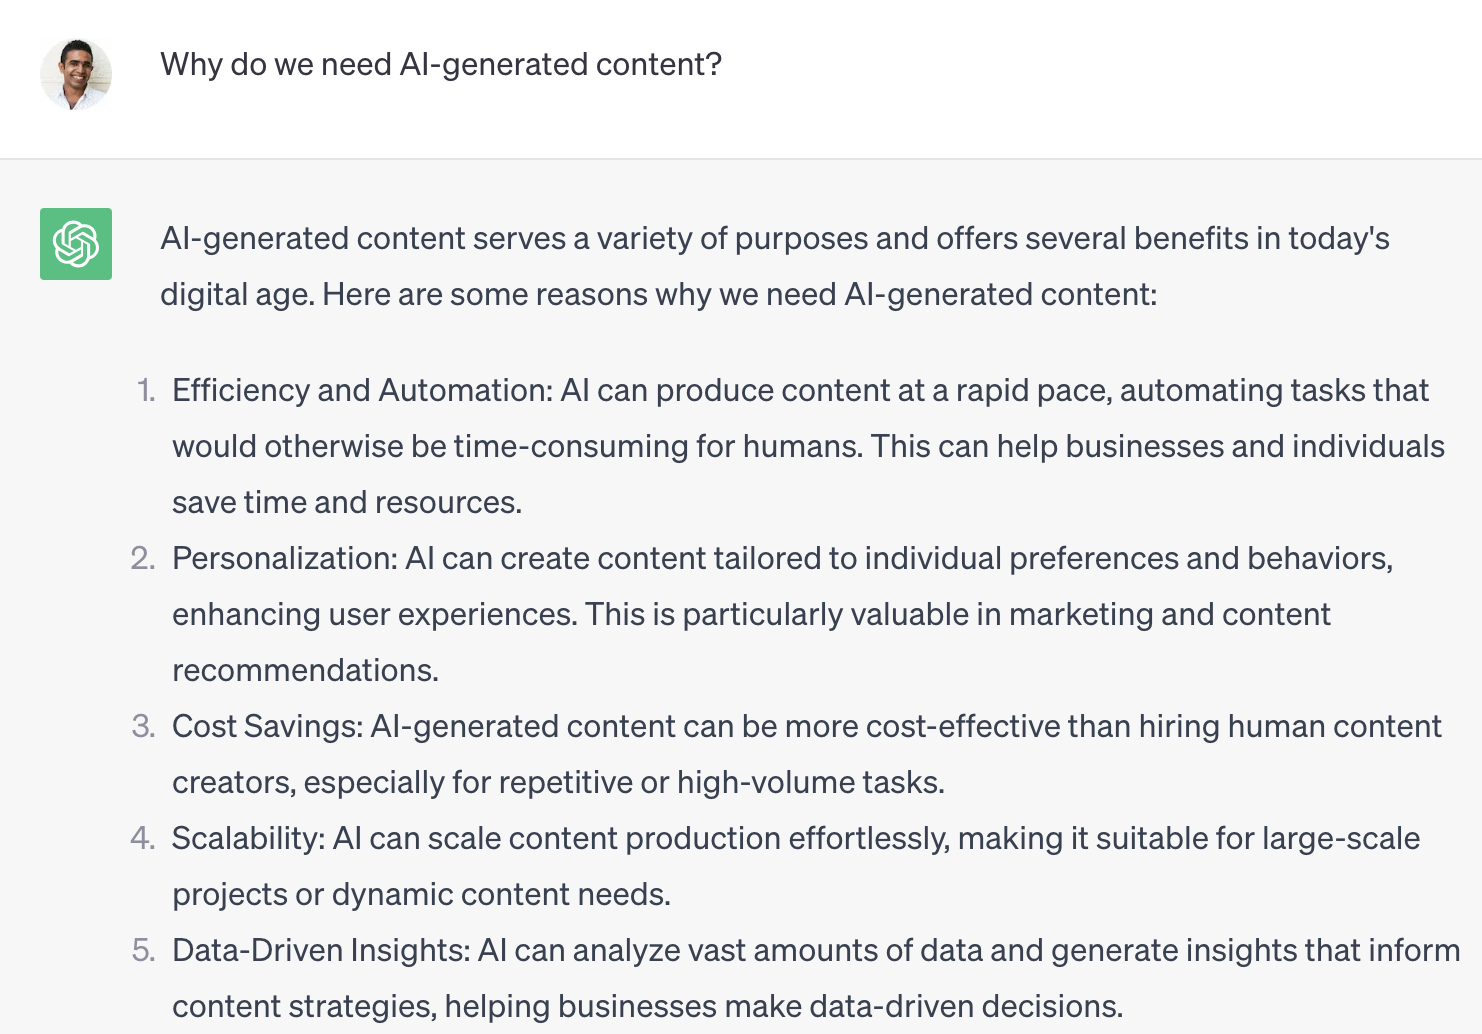 ChatGPT's response to "Why do we need AI-generated content?" query